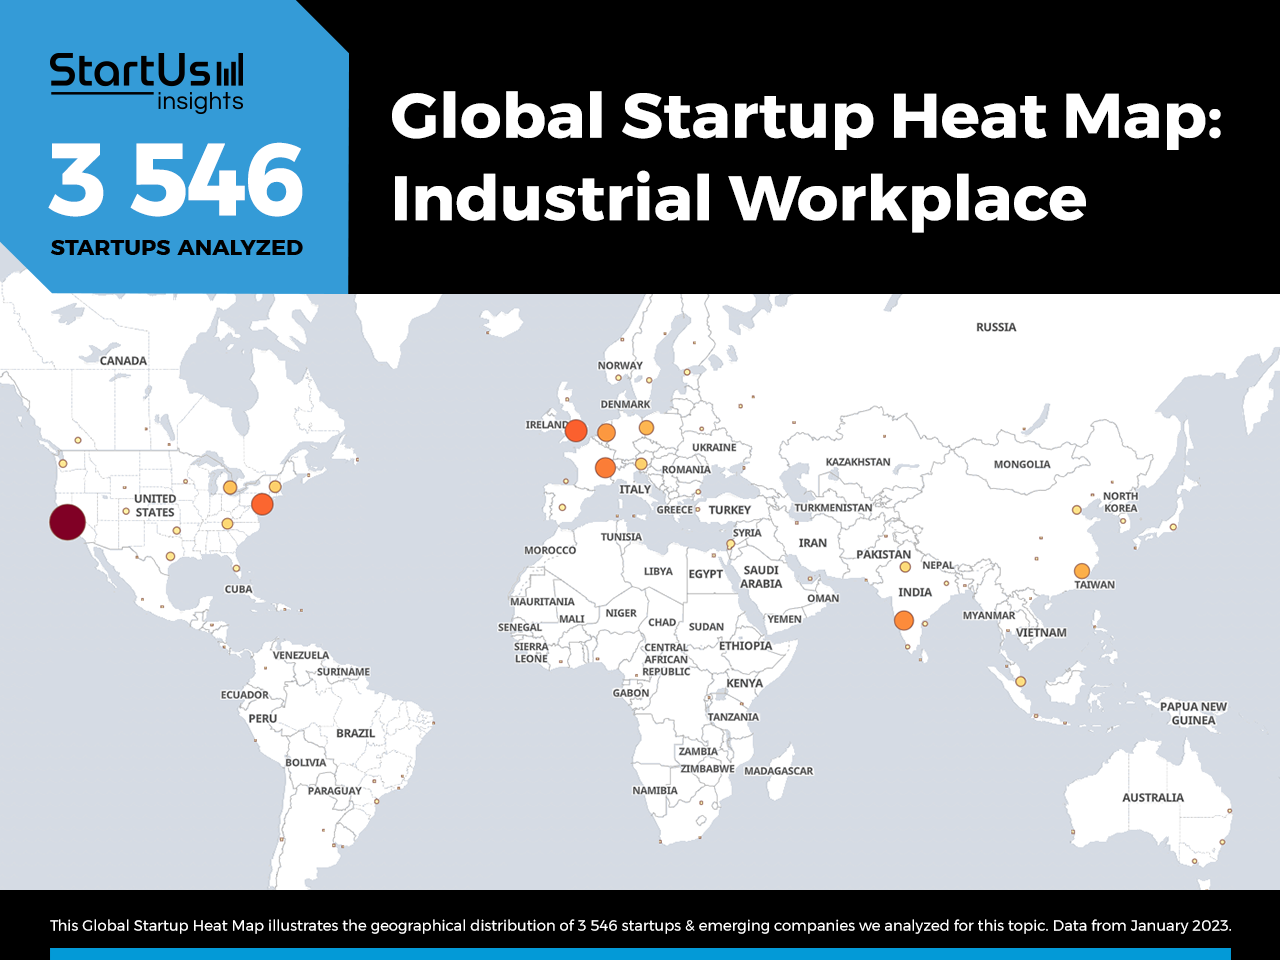 Industrial-Workplace-trends-Startups-TrendResearch-Heat-Map-StartUs-Insights-noresize